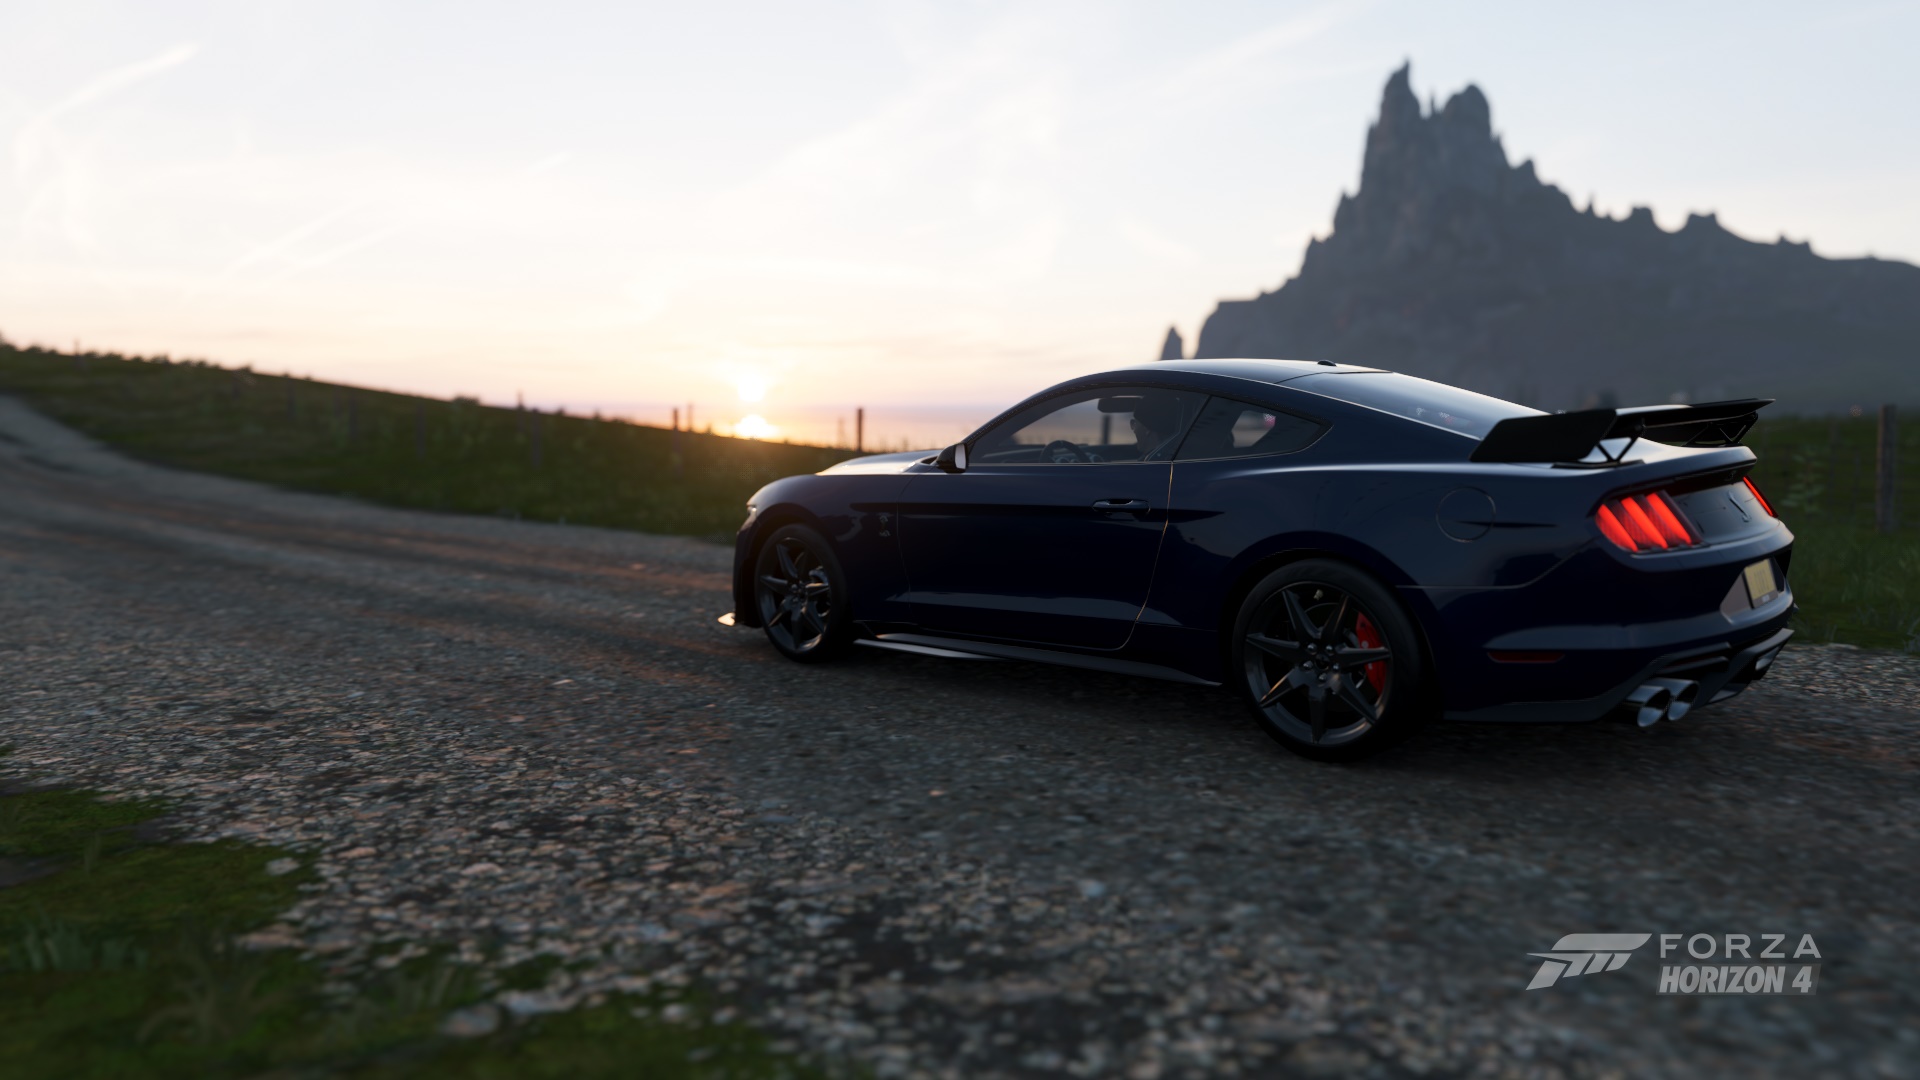 General 1920x1080 Ford Mustang Fortune Island Forza Forza Horizon 4 racing car Ford Ford Mustang Shelby video games Ford Mustang S550